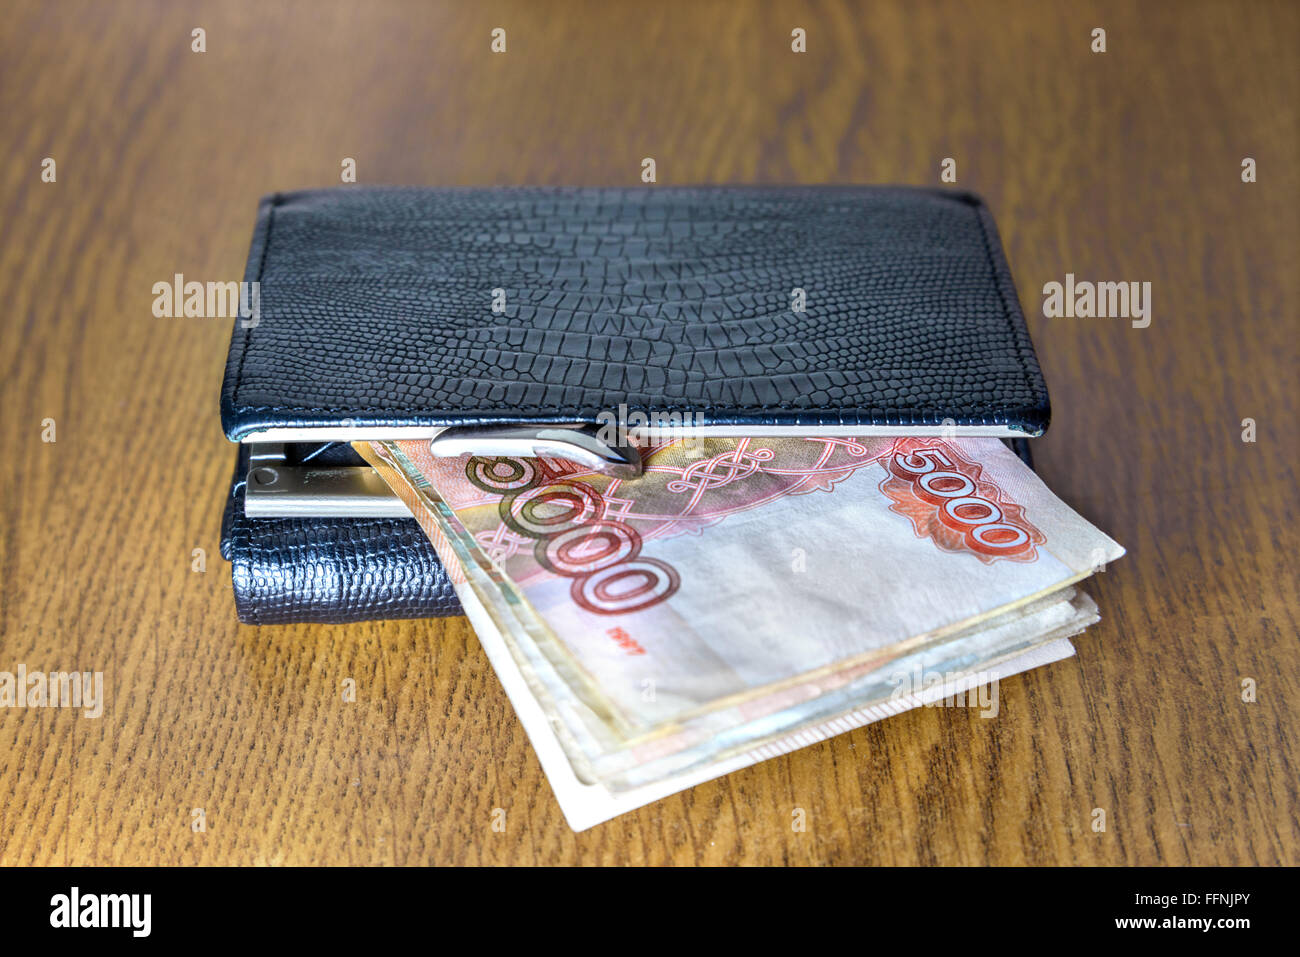 Wallet with cash lying on a wooden table Stock Photo